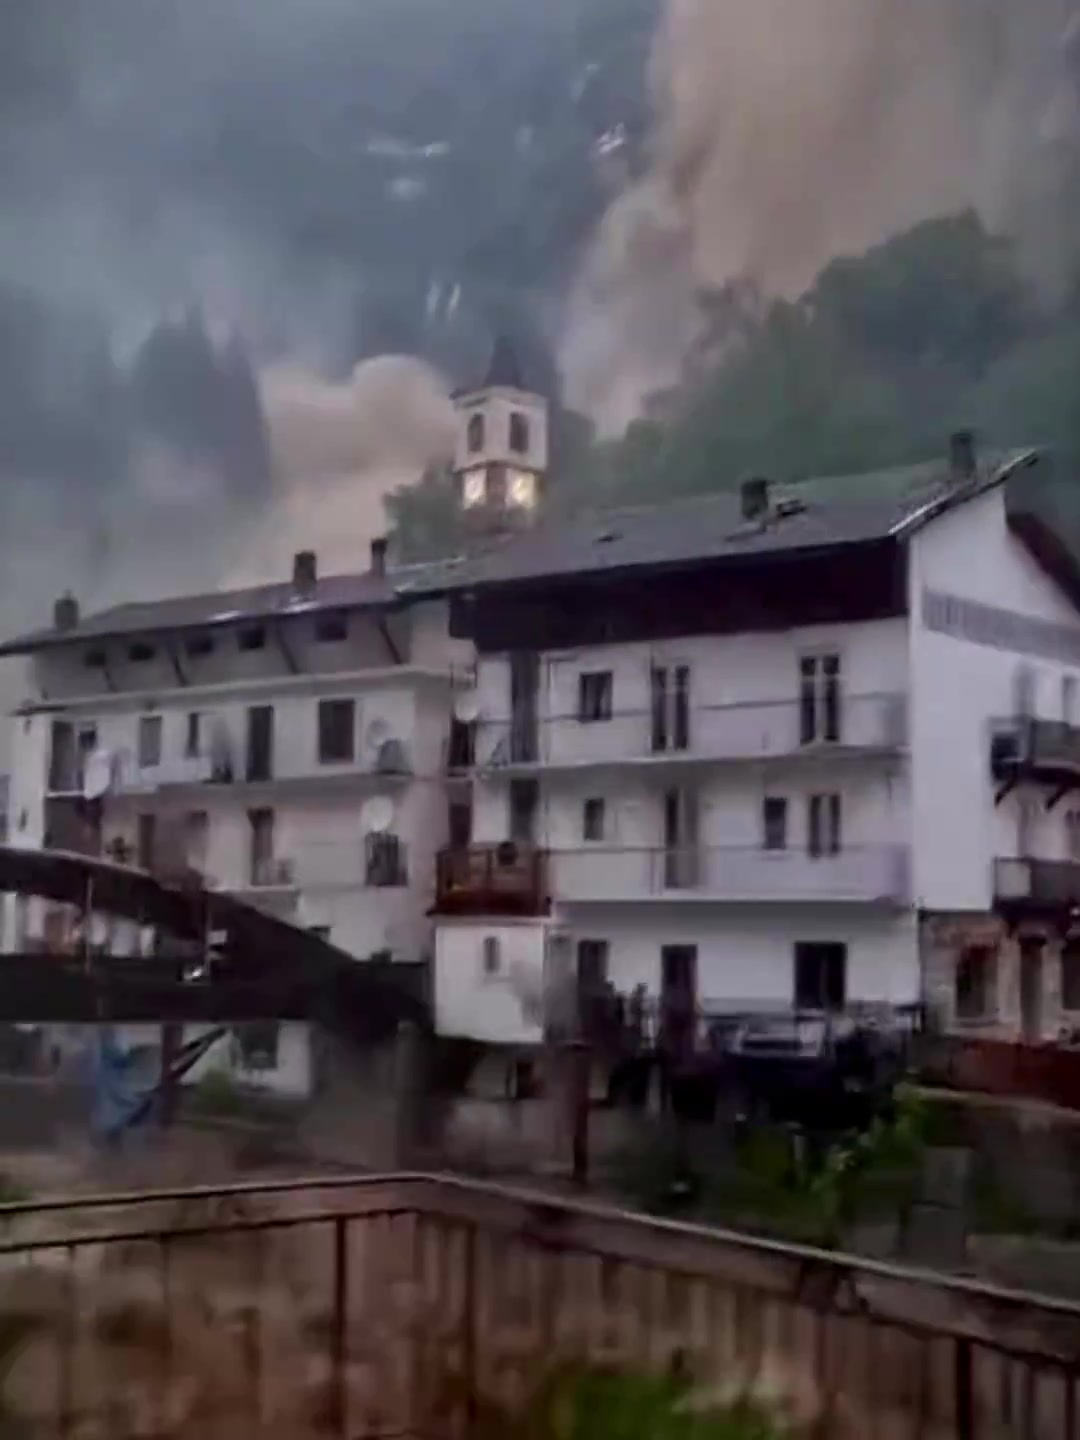 A critical situation is unfolding in some alpine valleys across northwest Italy, where persistent torrential rainfall associated with severe thunderstorms is now causing life-threatening flash flooding. This is footage from Noasca in the Orco Valley. Credit: Pro-Loco Noasca